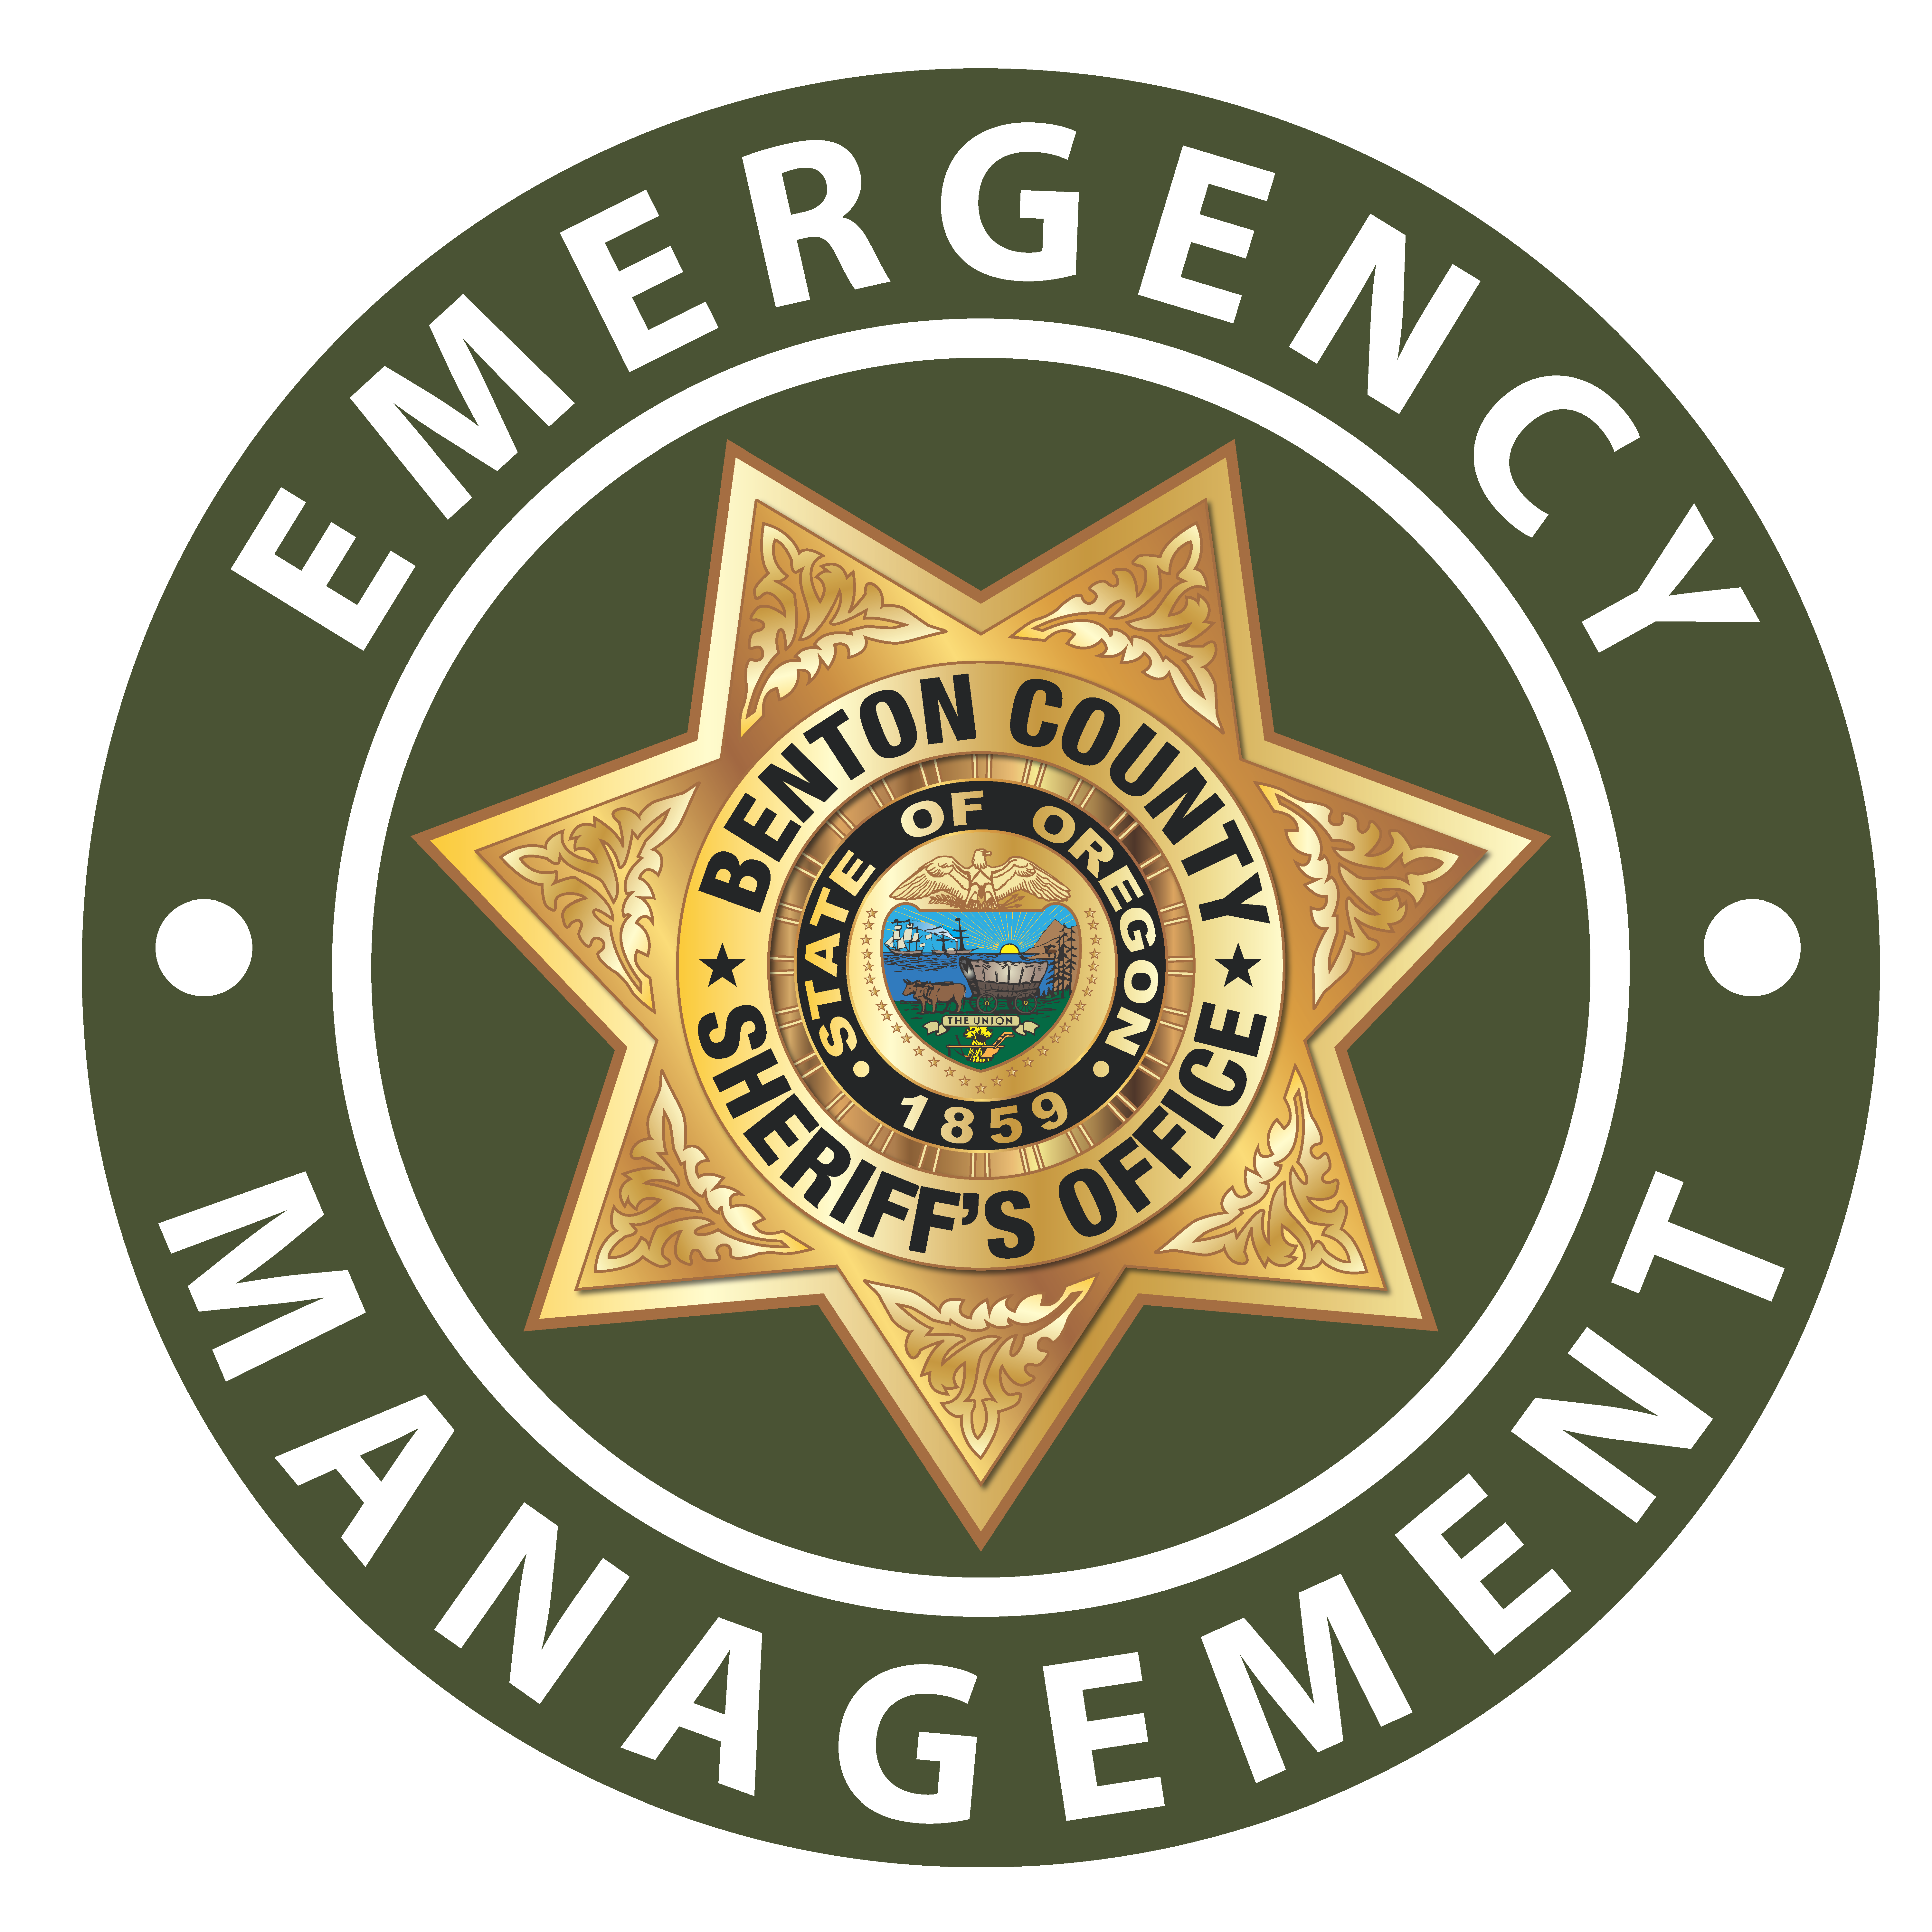 The Emergency Management Division logo